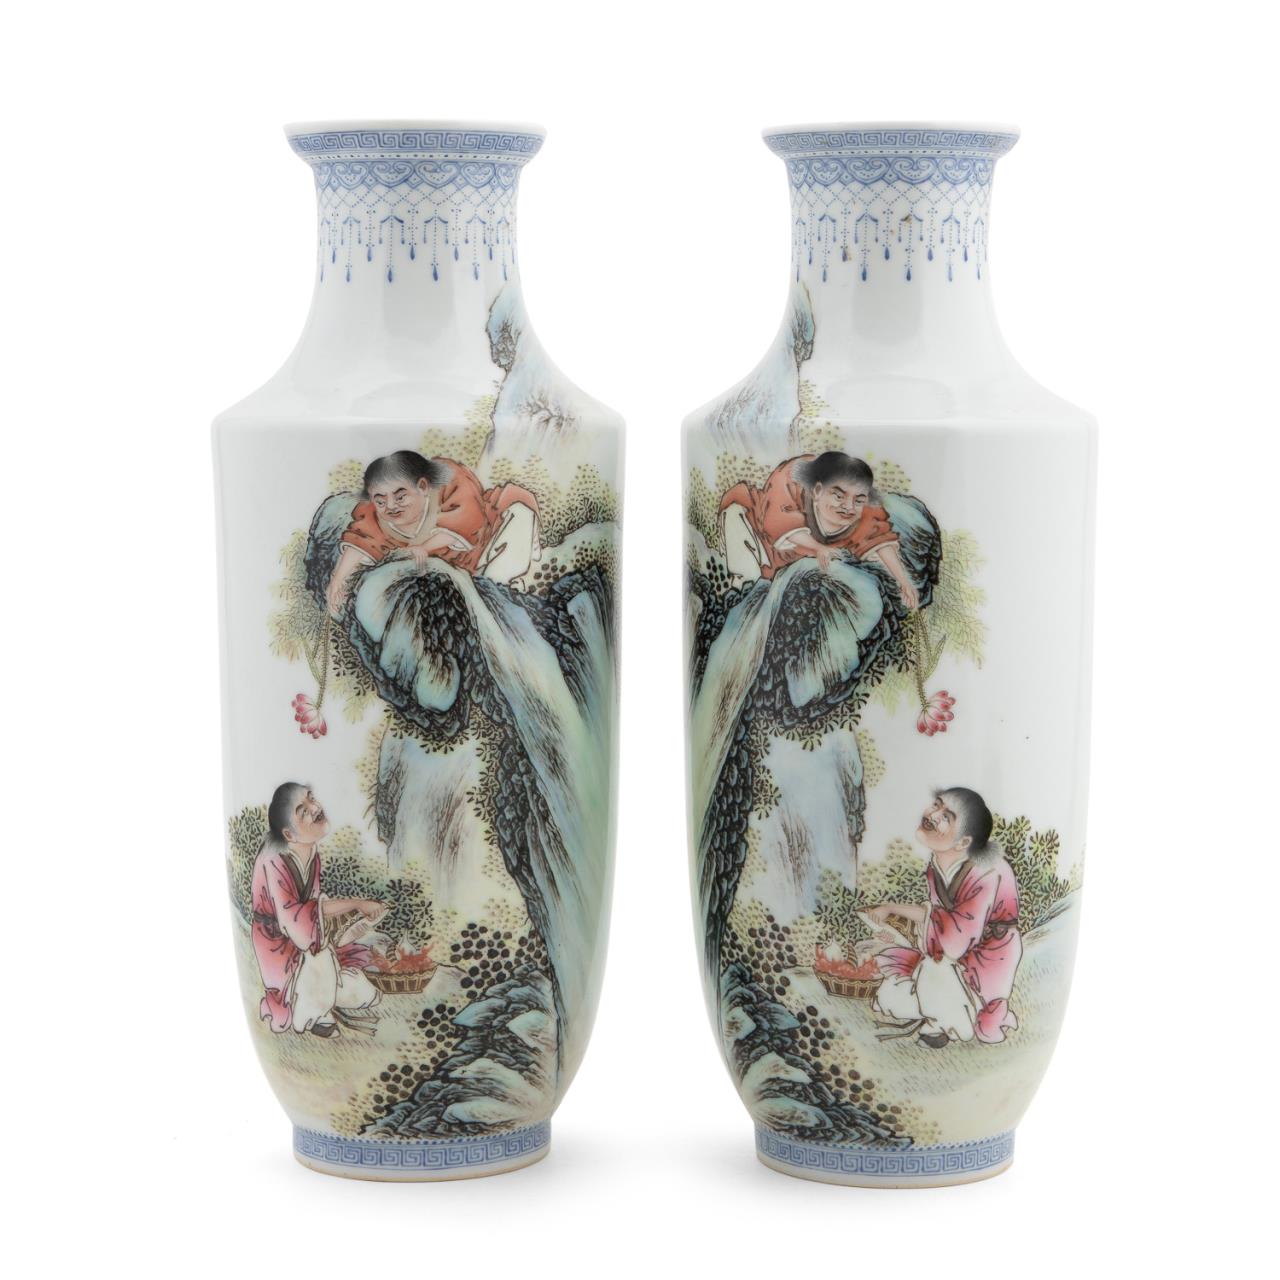 PAIR OF CHINESE PORCELAIN VASES 3581eb